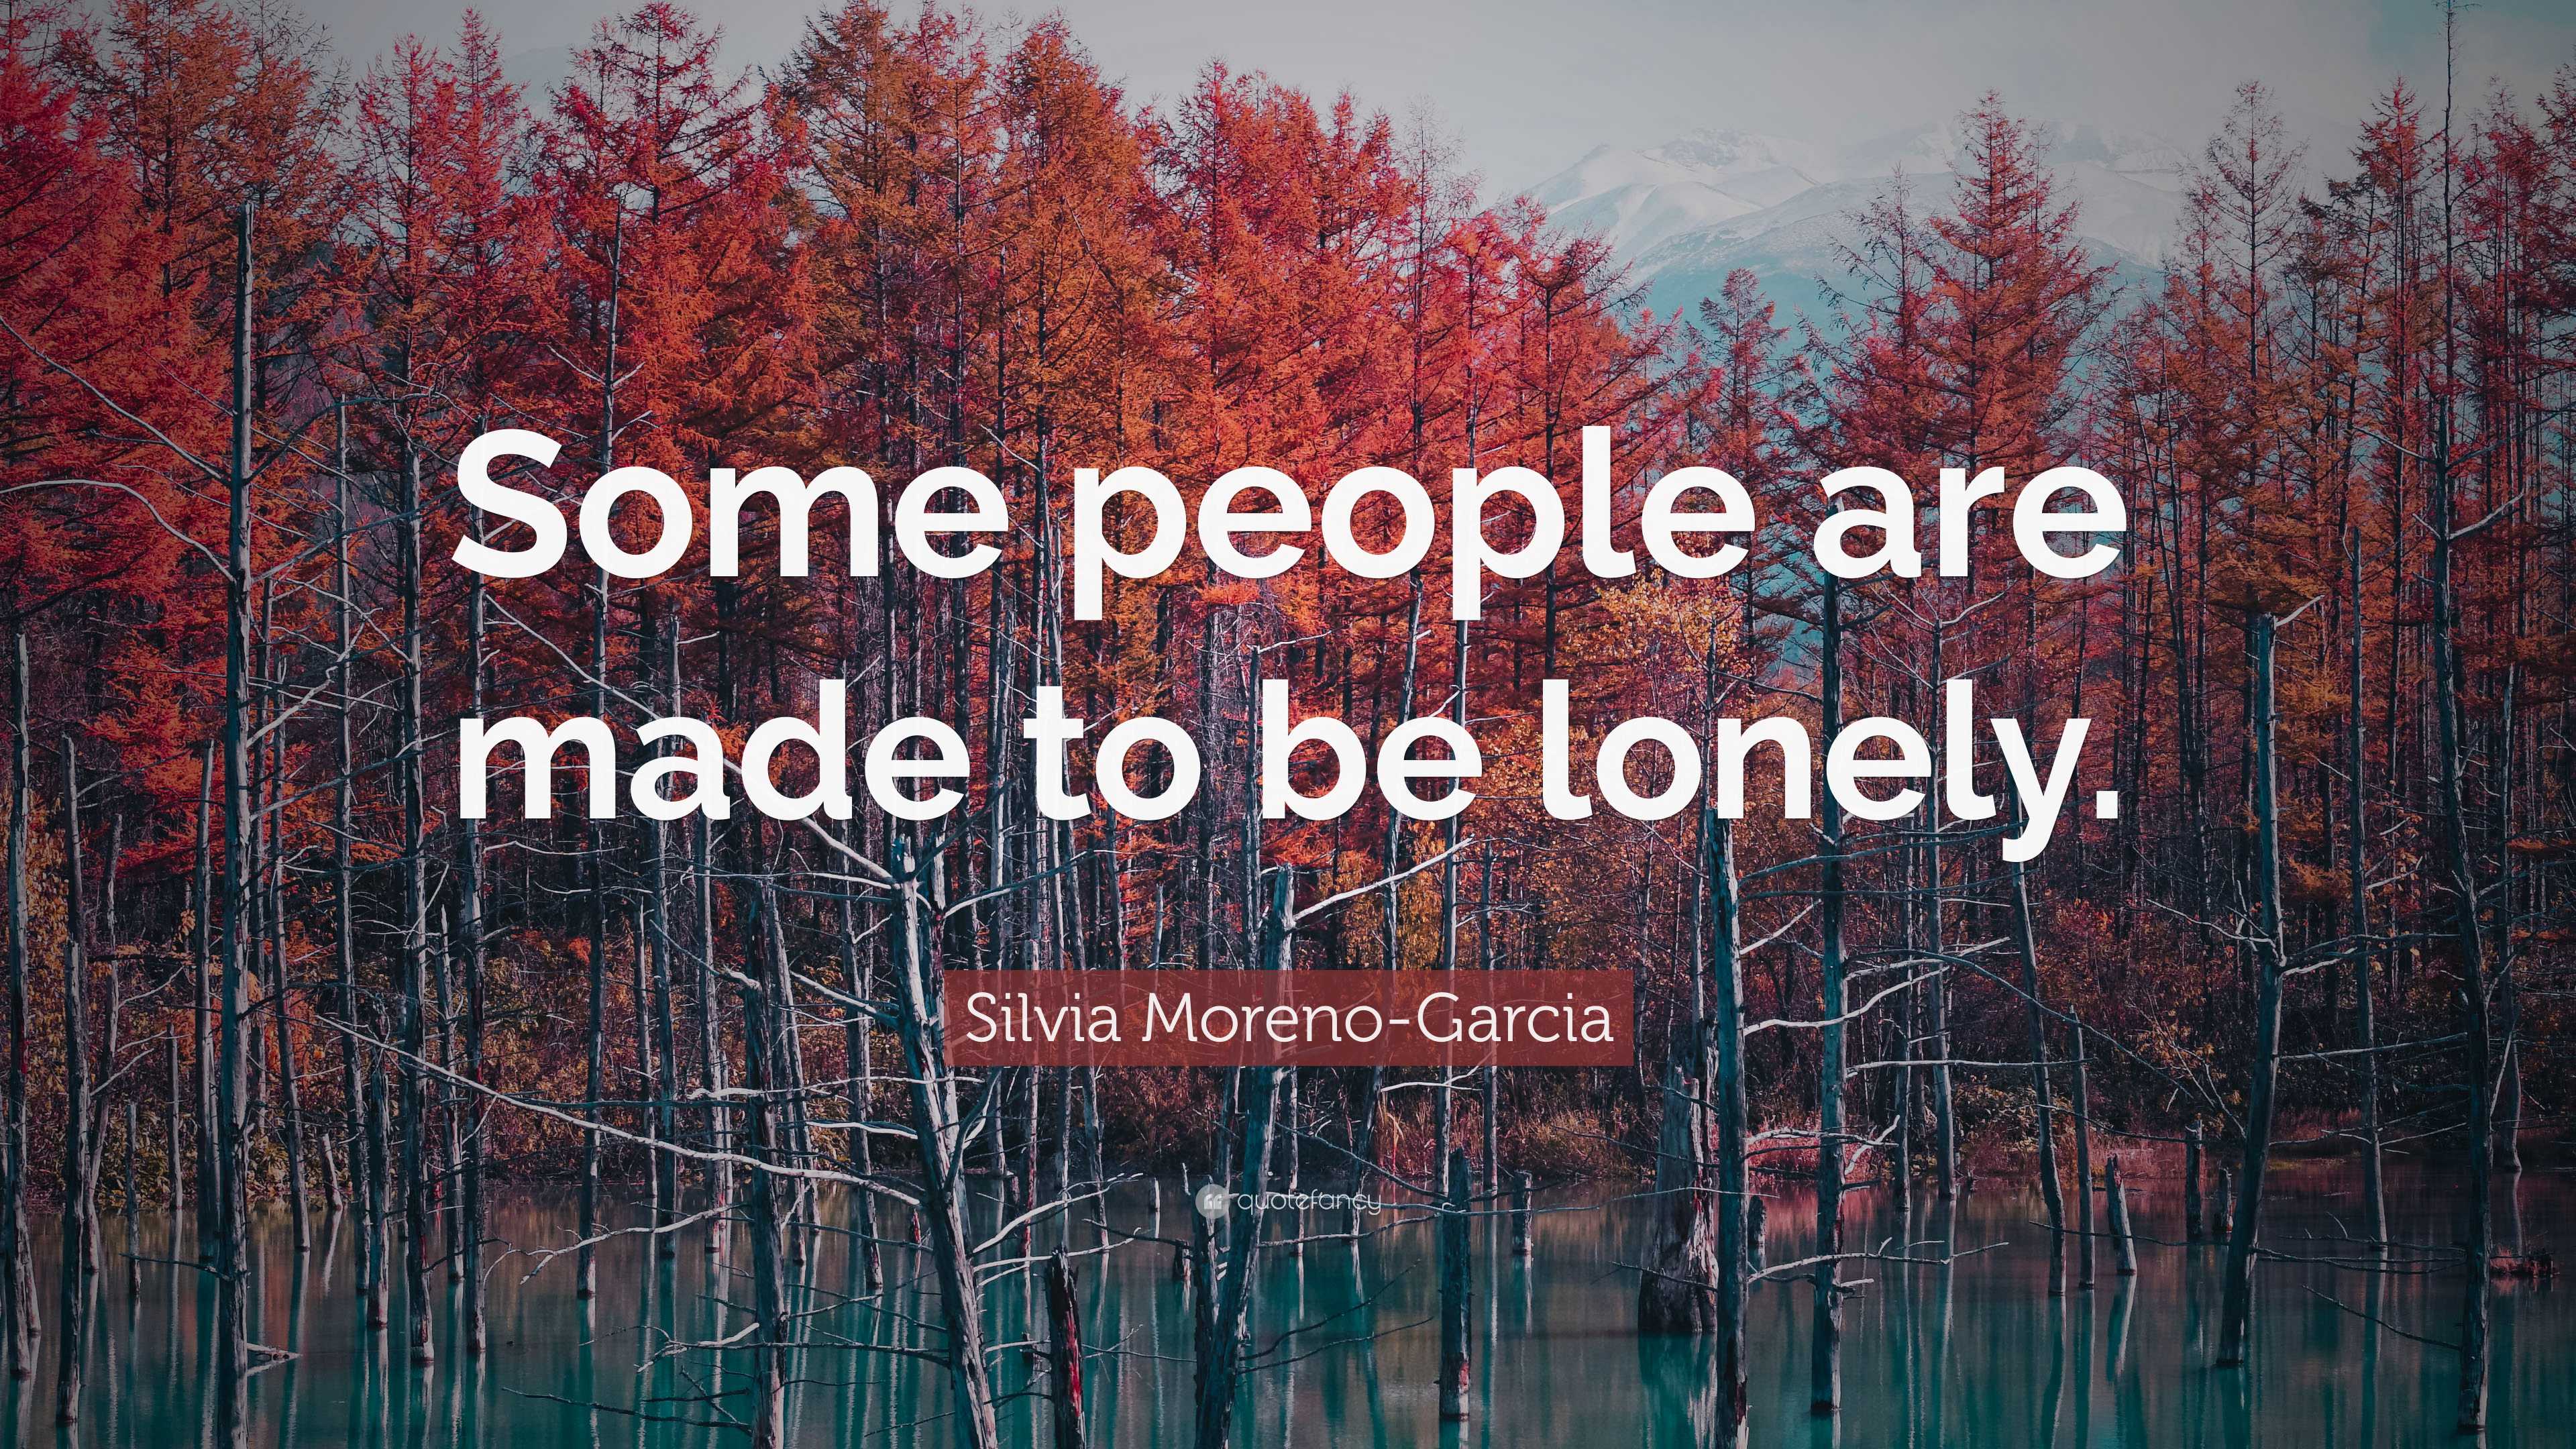 Silvia Moreno-Garcia Quote: “Some people are made to be lonely.”